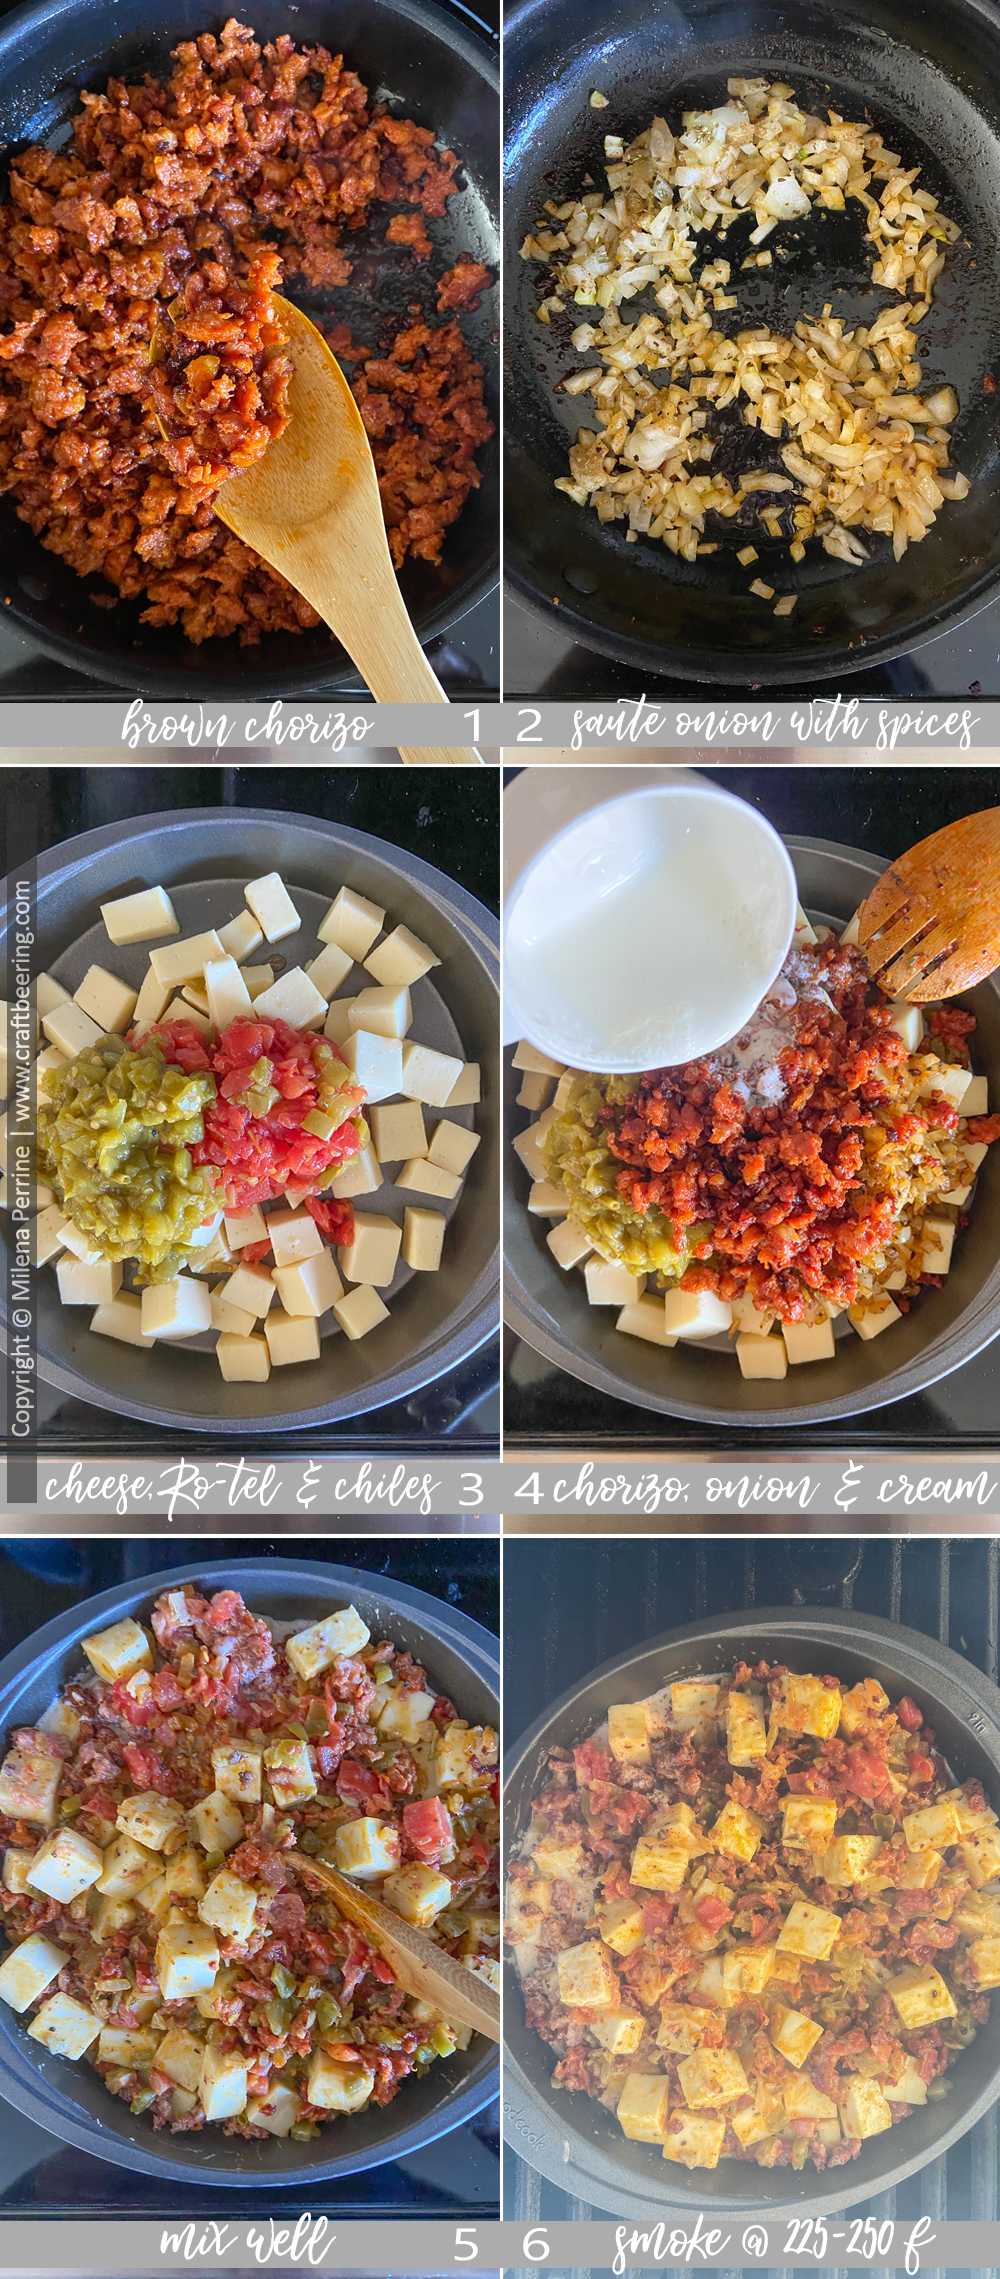 How to make queso dip on smoker - Part 1 image sequence.